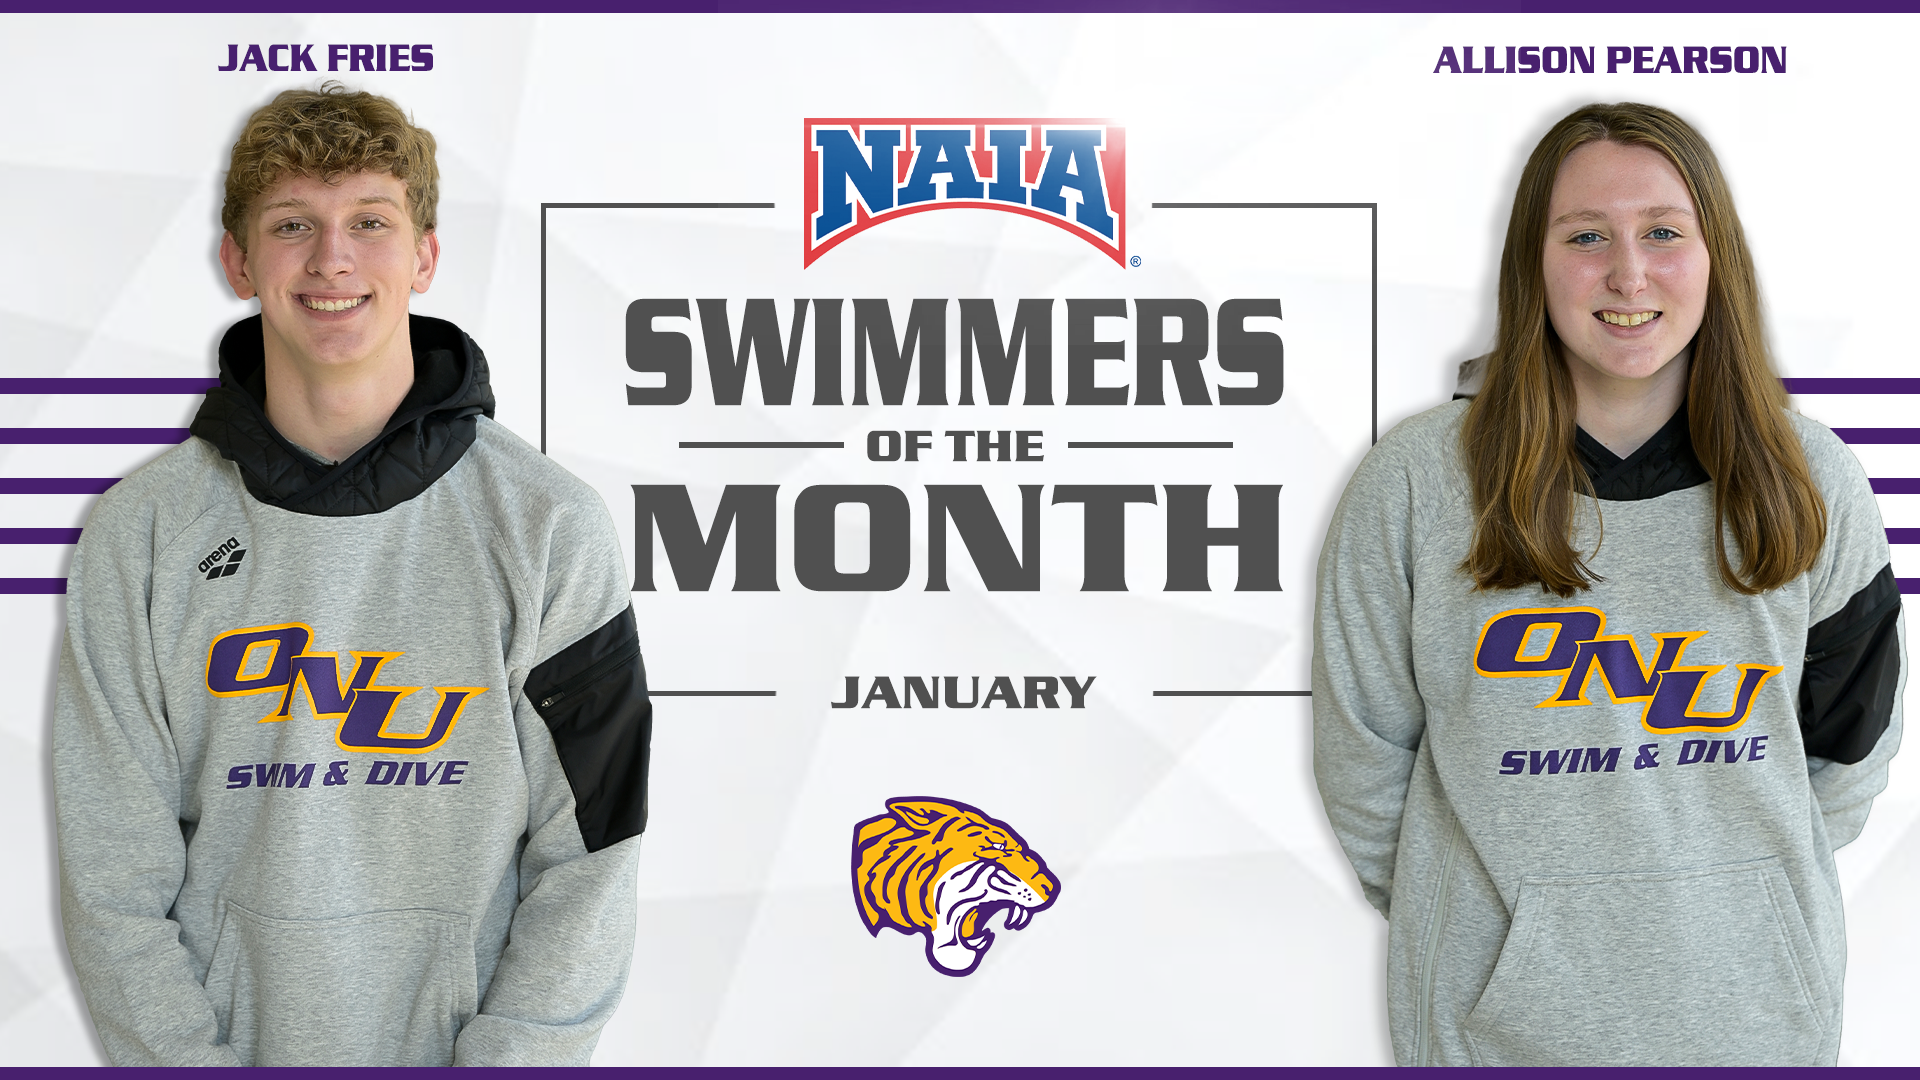 TIGERS CAPTURE BOTH NAIA NATIONAL SWIMMER OF THE MONTH AWARDS